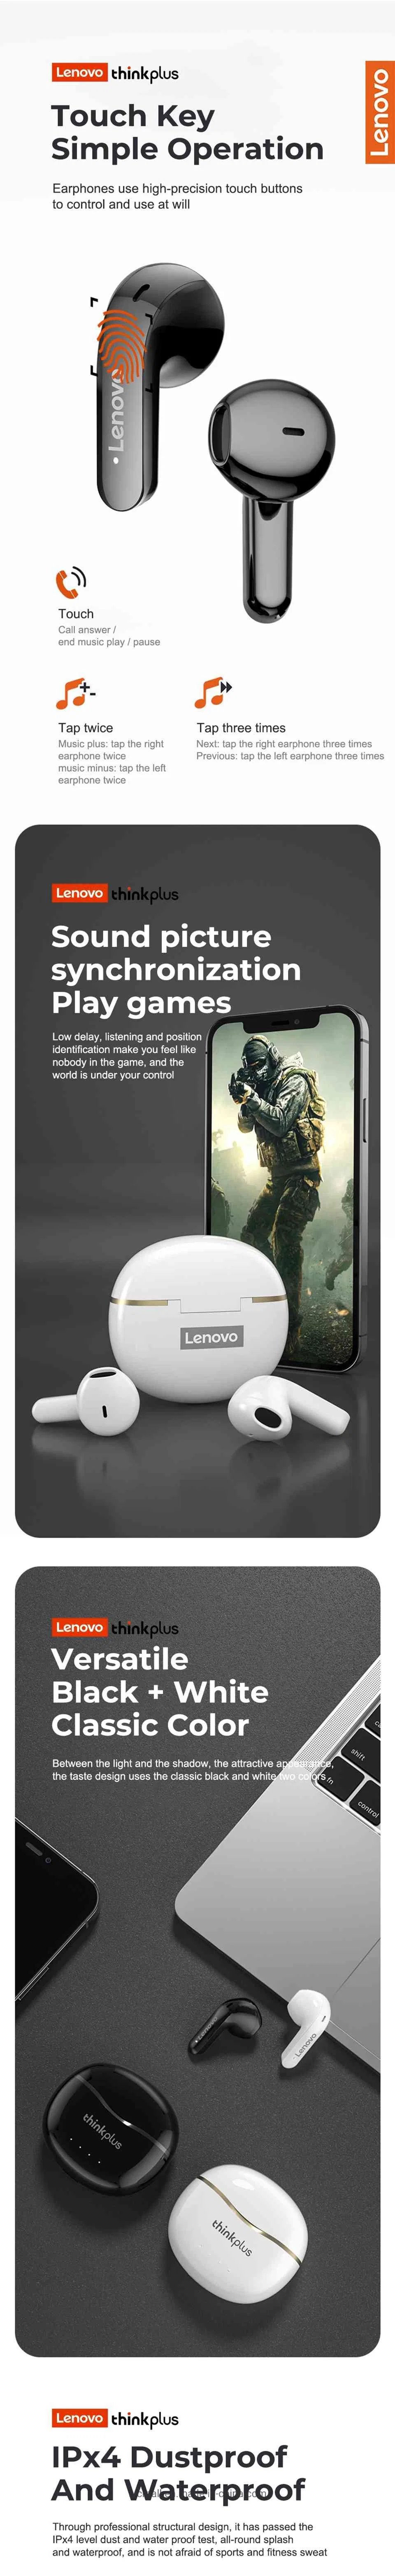 Lenovo Thinkplus X16 Wireless Bluetooth Earphones Touch Control Noise Reduction Headsets Tws Gaming Headphones - White